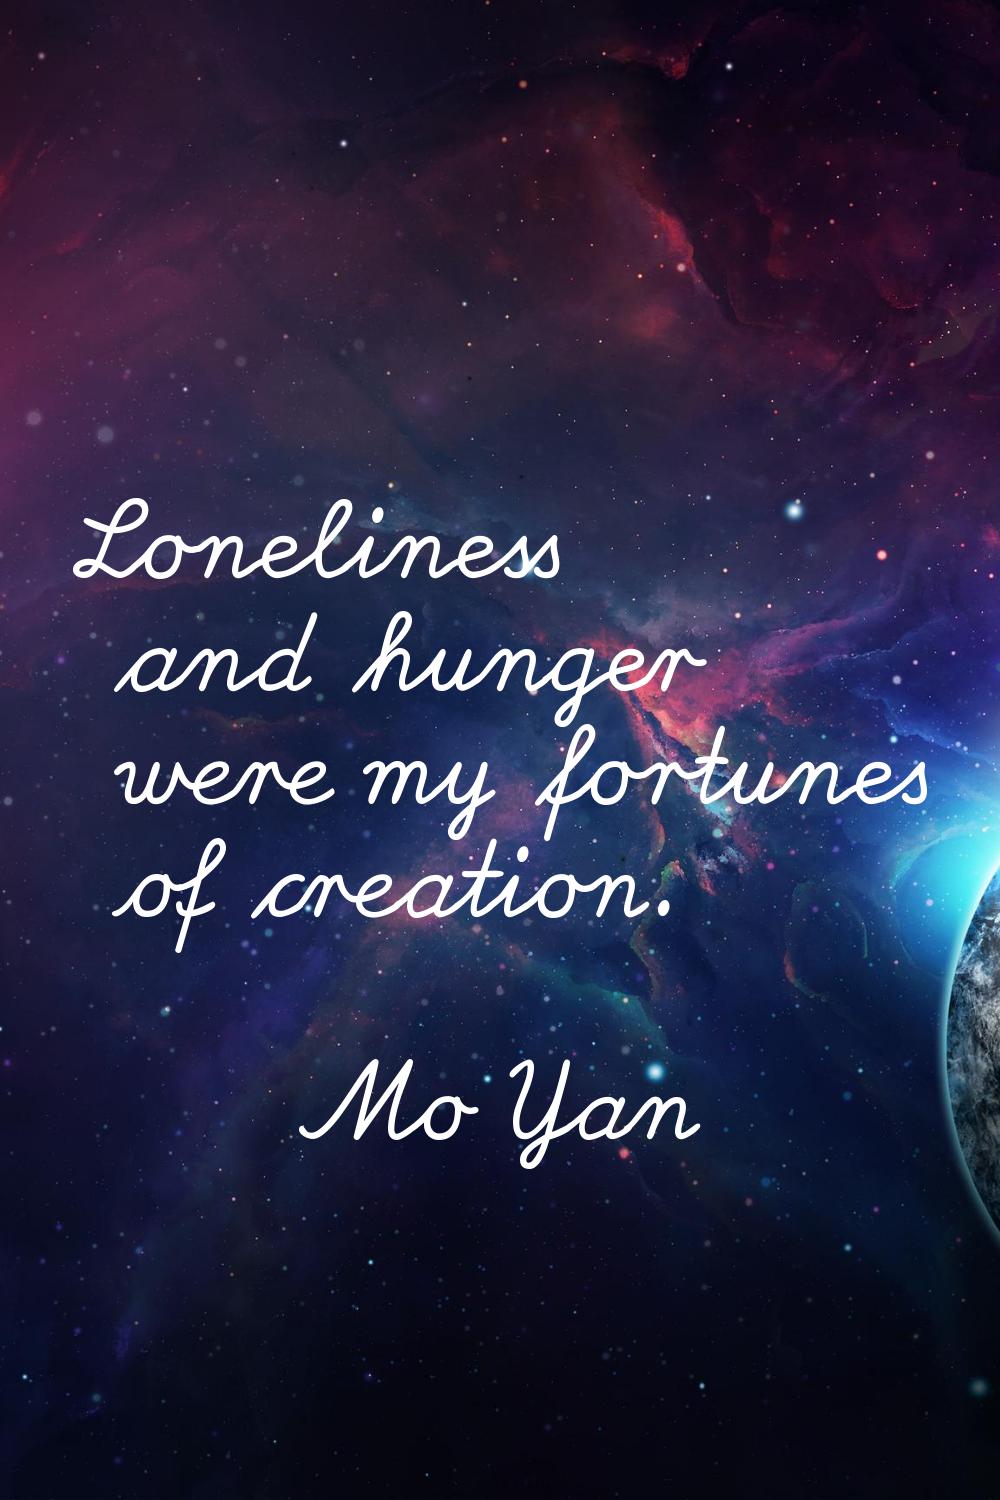 Loneliness and hunger were my fortunes of creation.